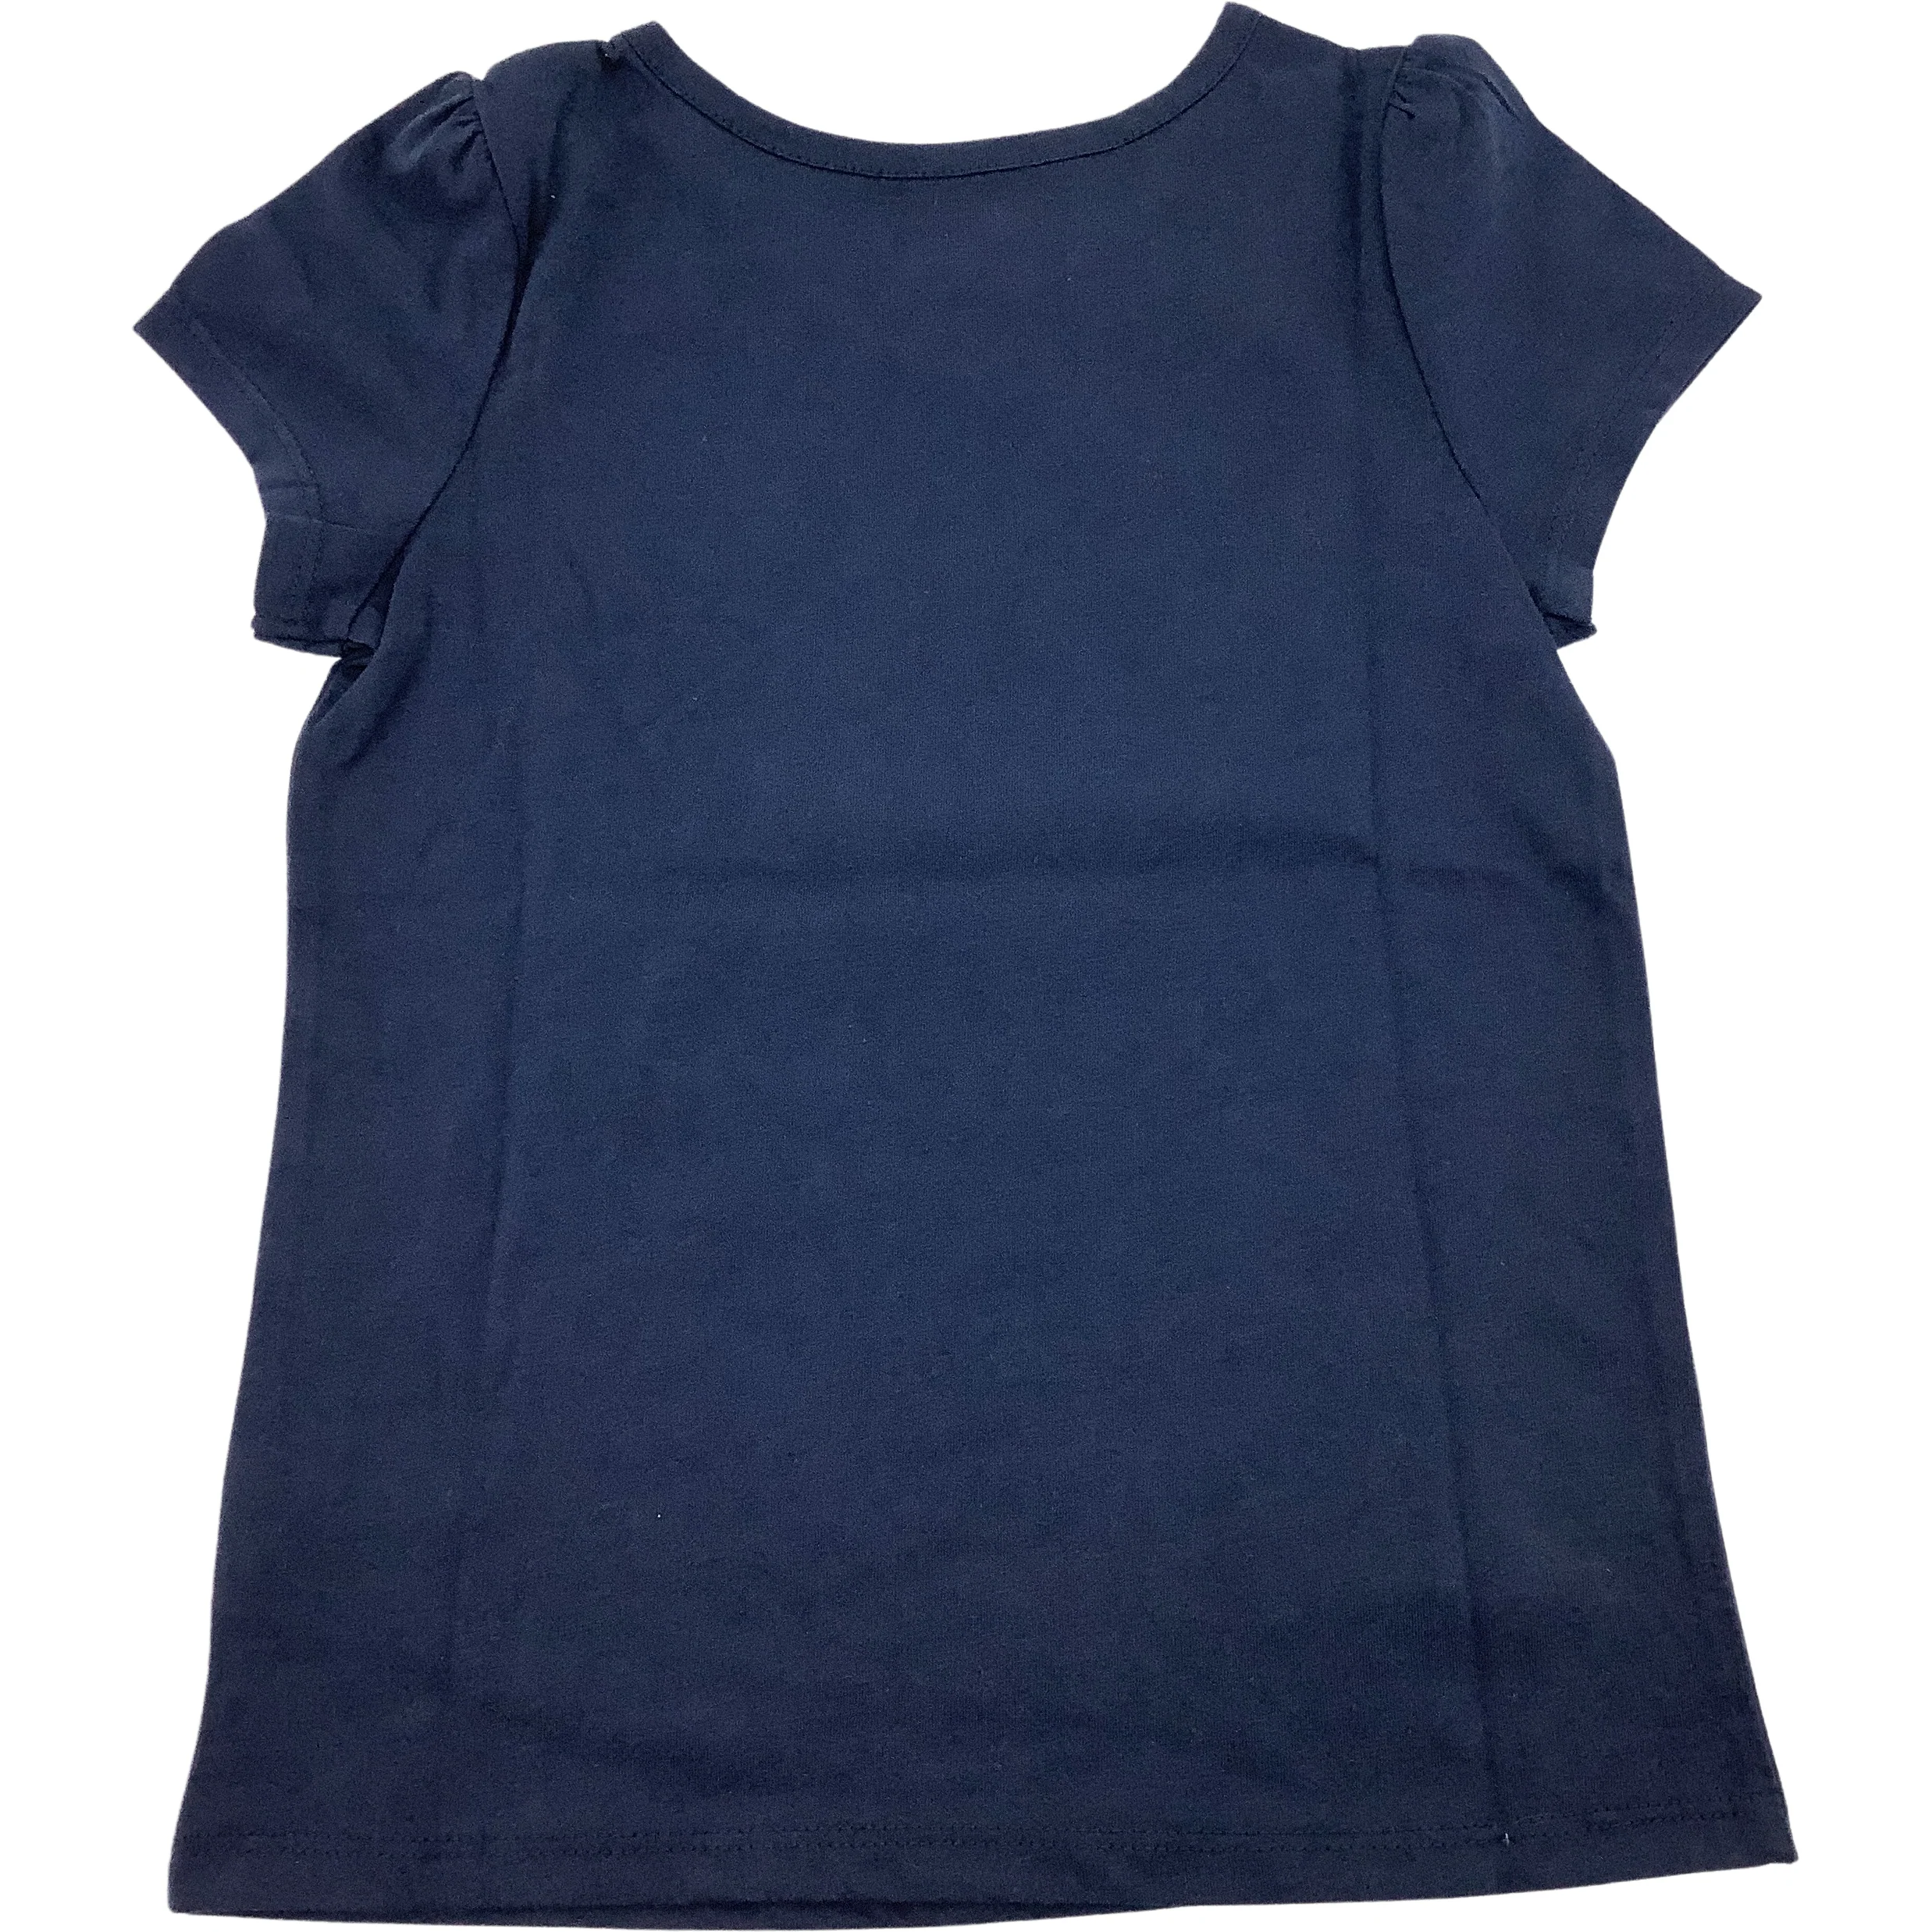 Epic Thread's Girl's T-Shirt / Navy / Love / Kid's Summer Clothes / Various Sizes